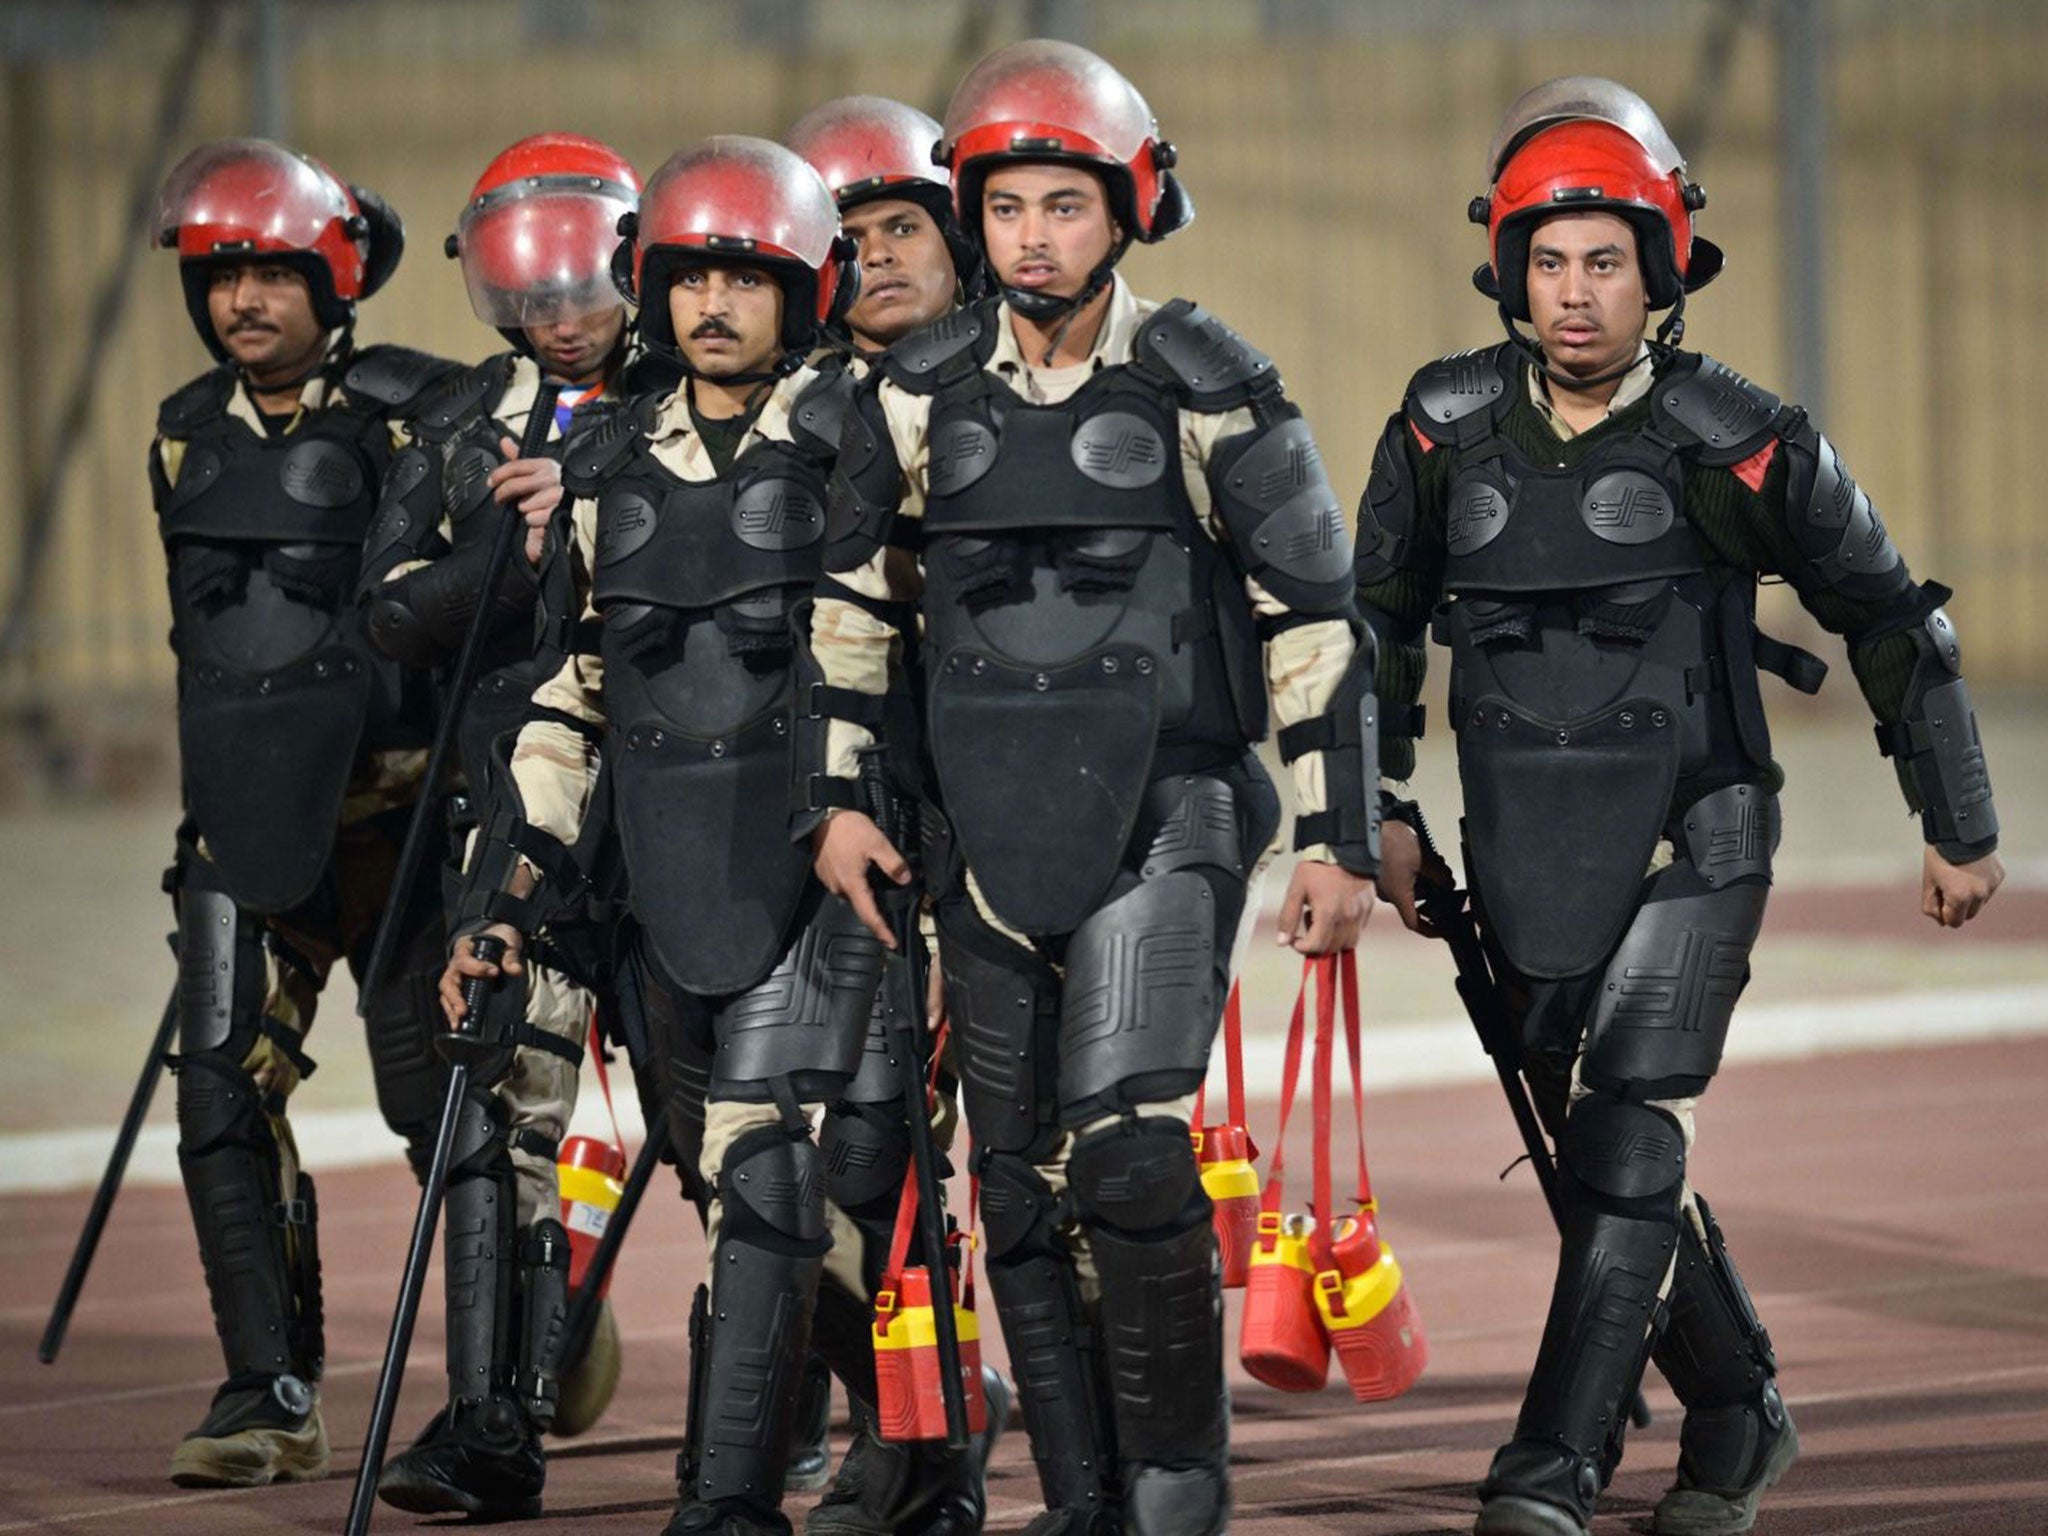 Egyptian policemen arrive at the stadium during before the Egyptian Premier League football match between Al-Ahly and Zamalek football clubs in Cairo on January 29, 2015.